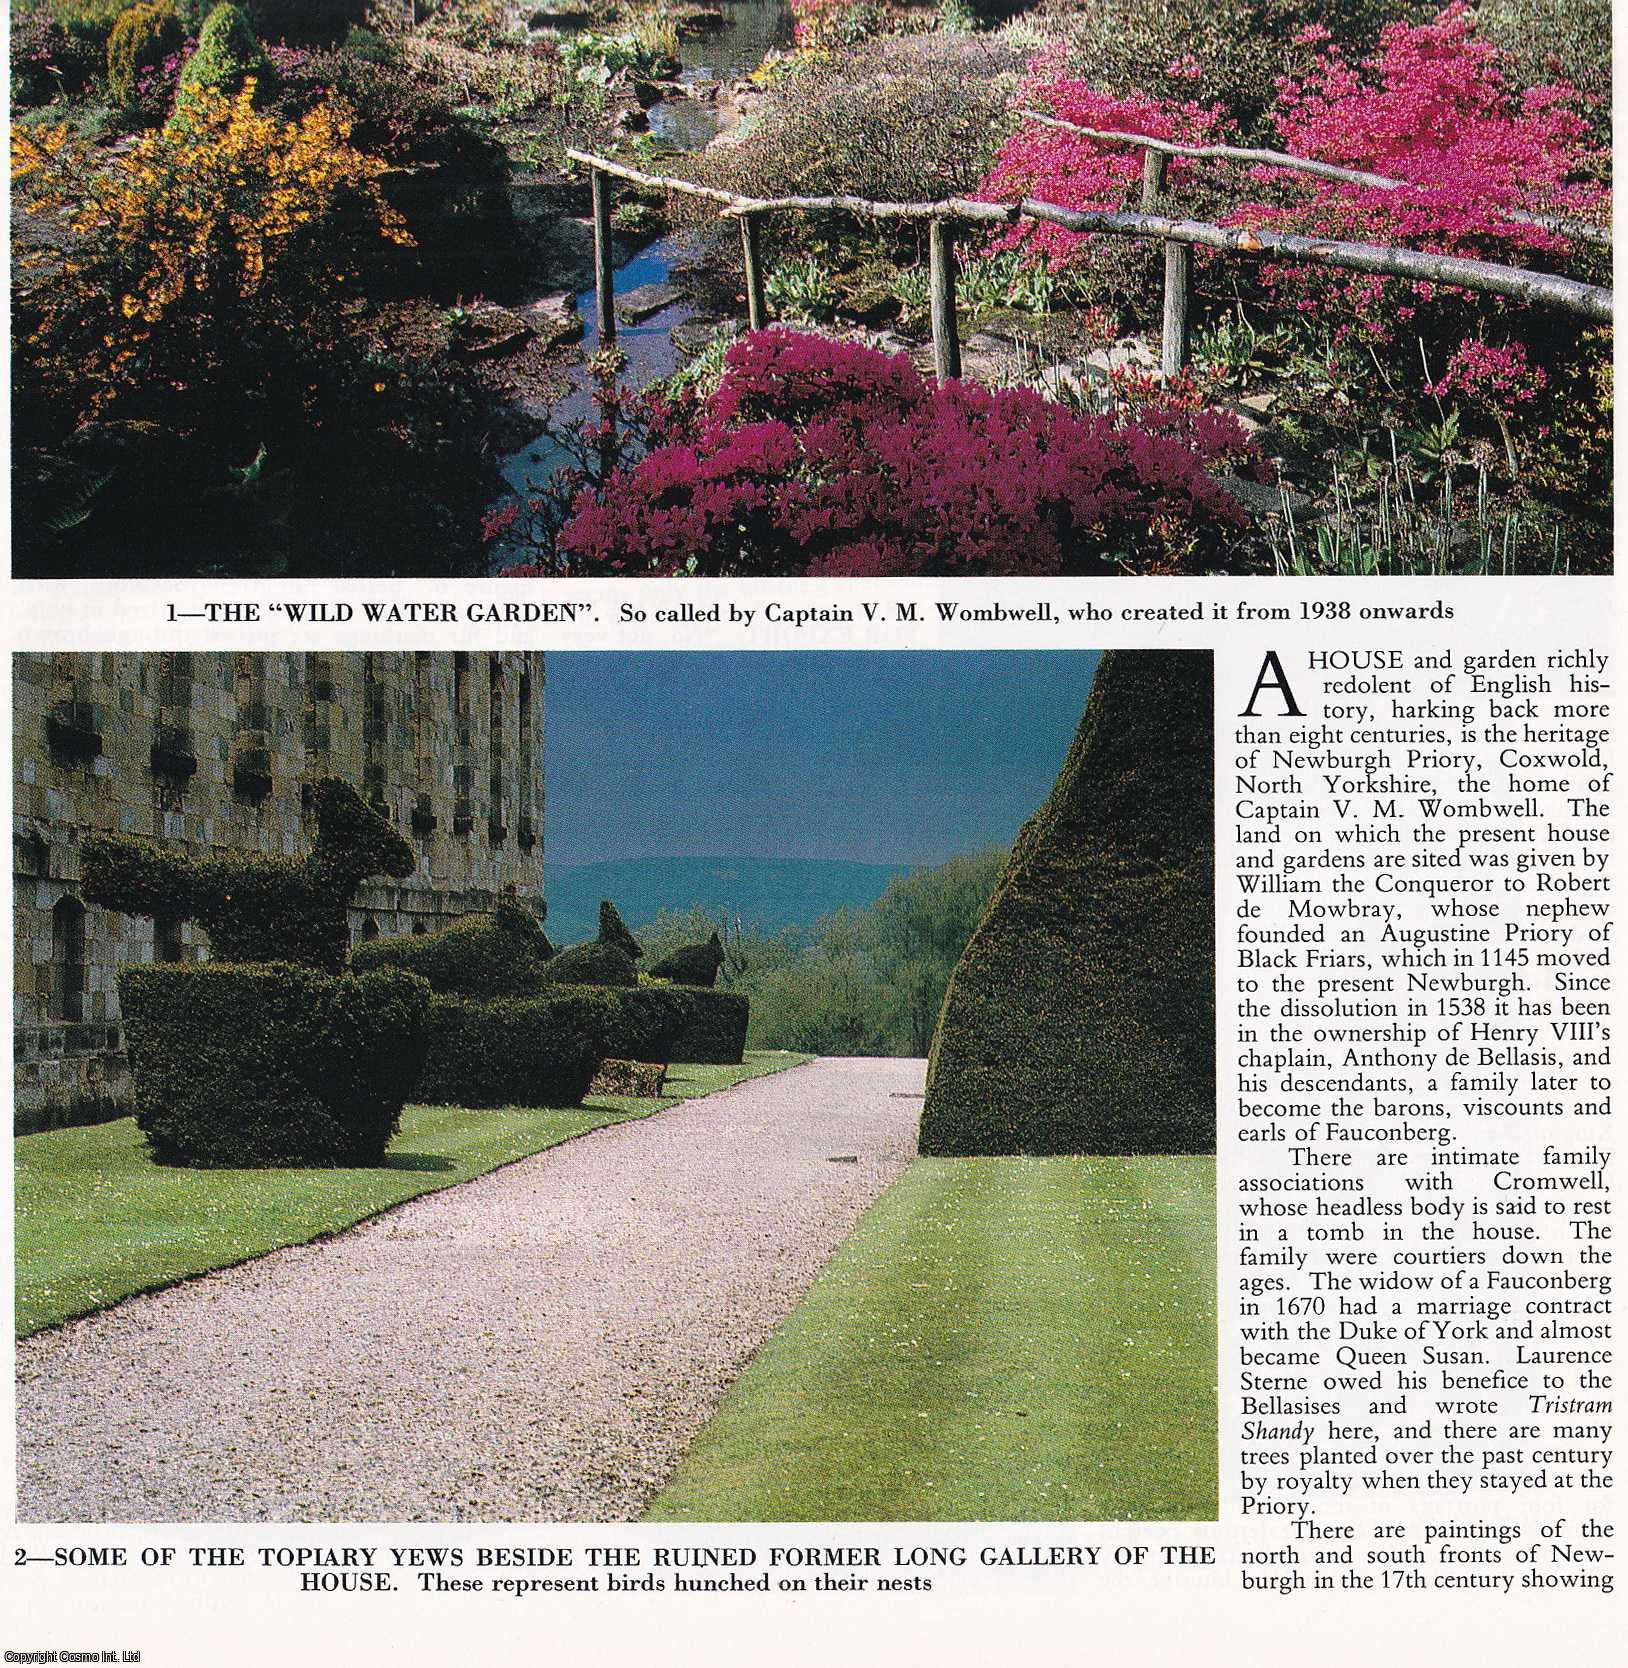 Ken Lemmon - The Gardens of Newburgh Priory, North Yorkshire. Several pictures and accompanying text, removed from an original issue of Country Life Magazine, 1986.